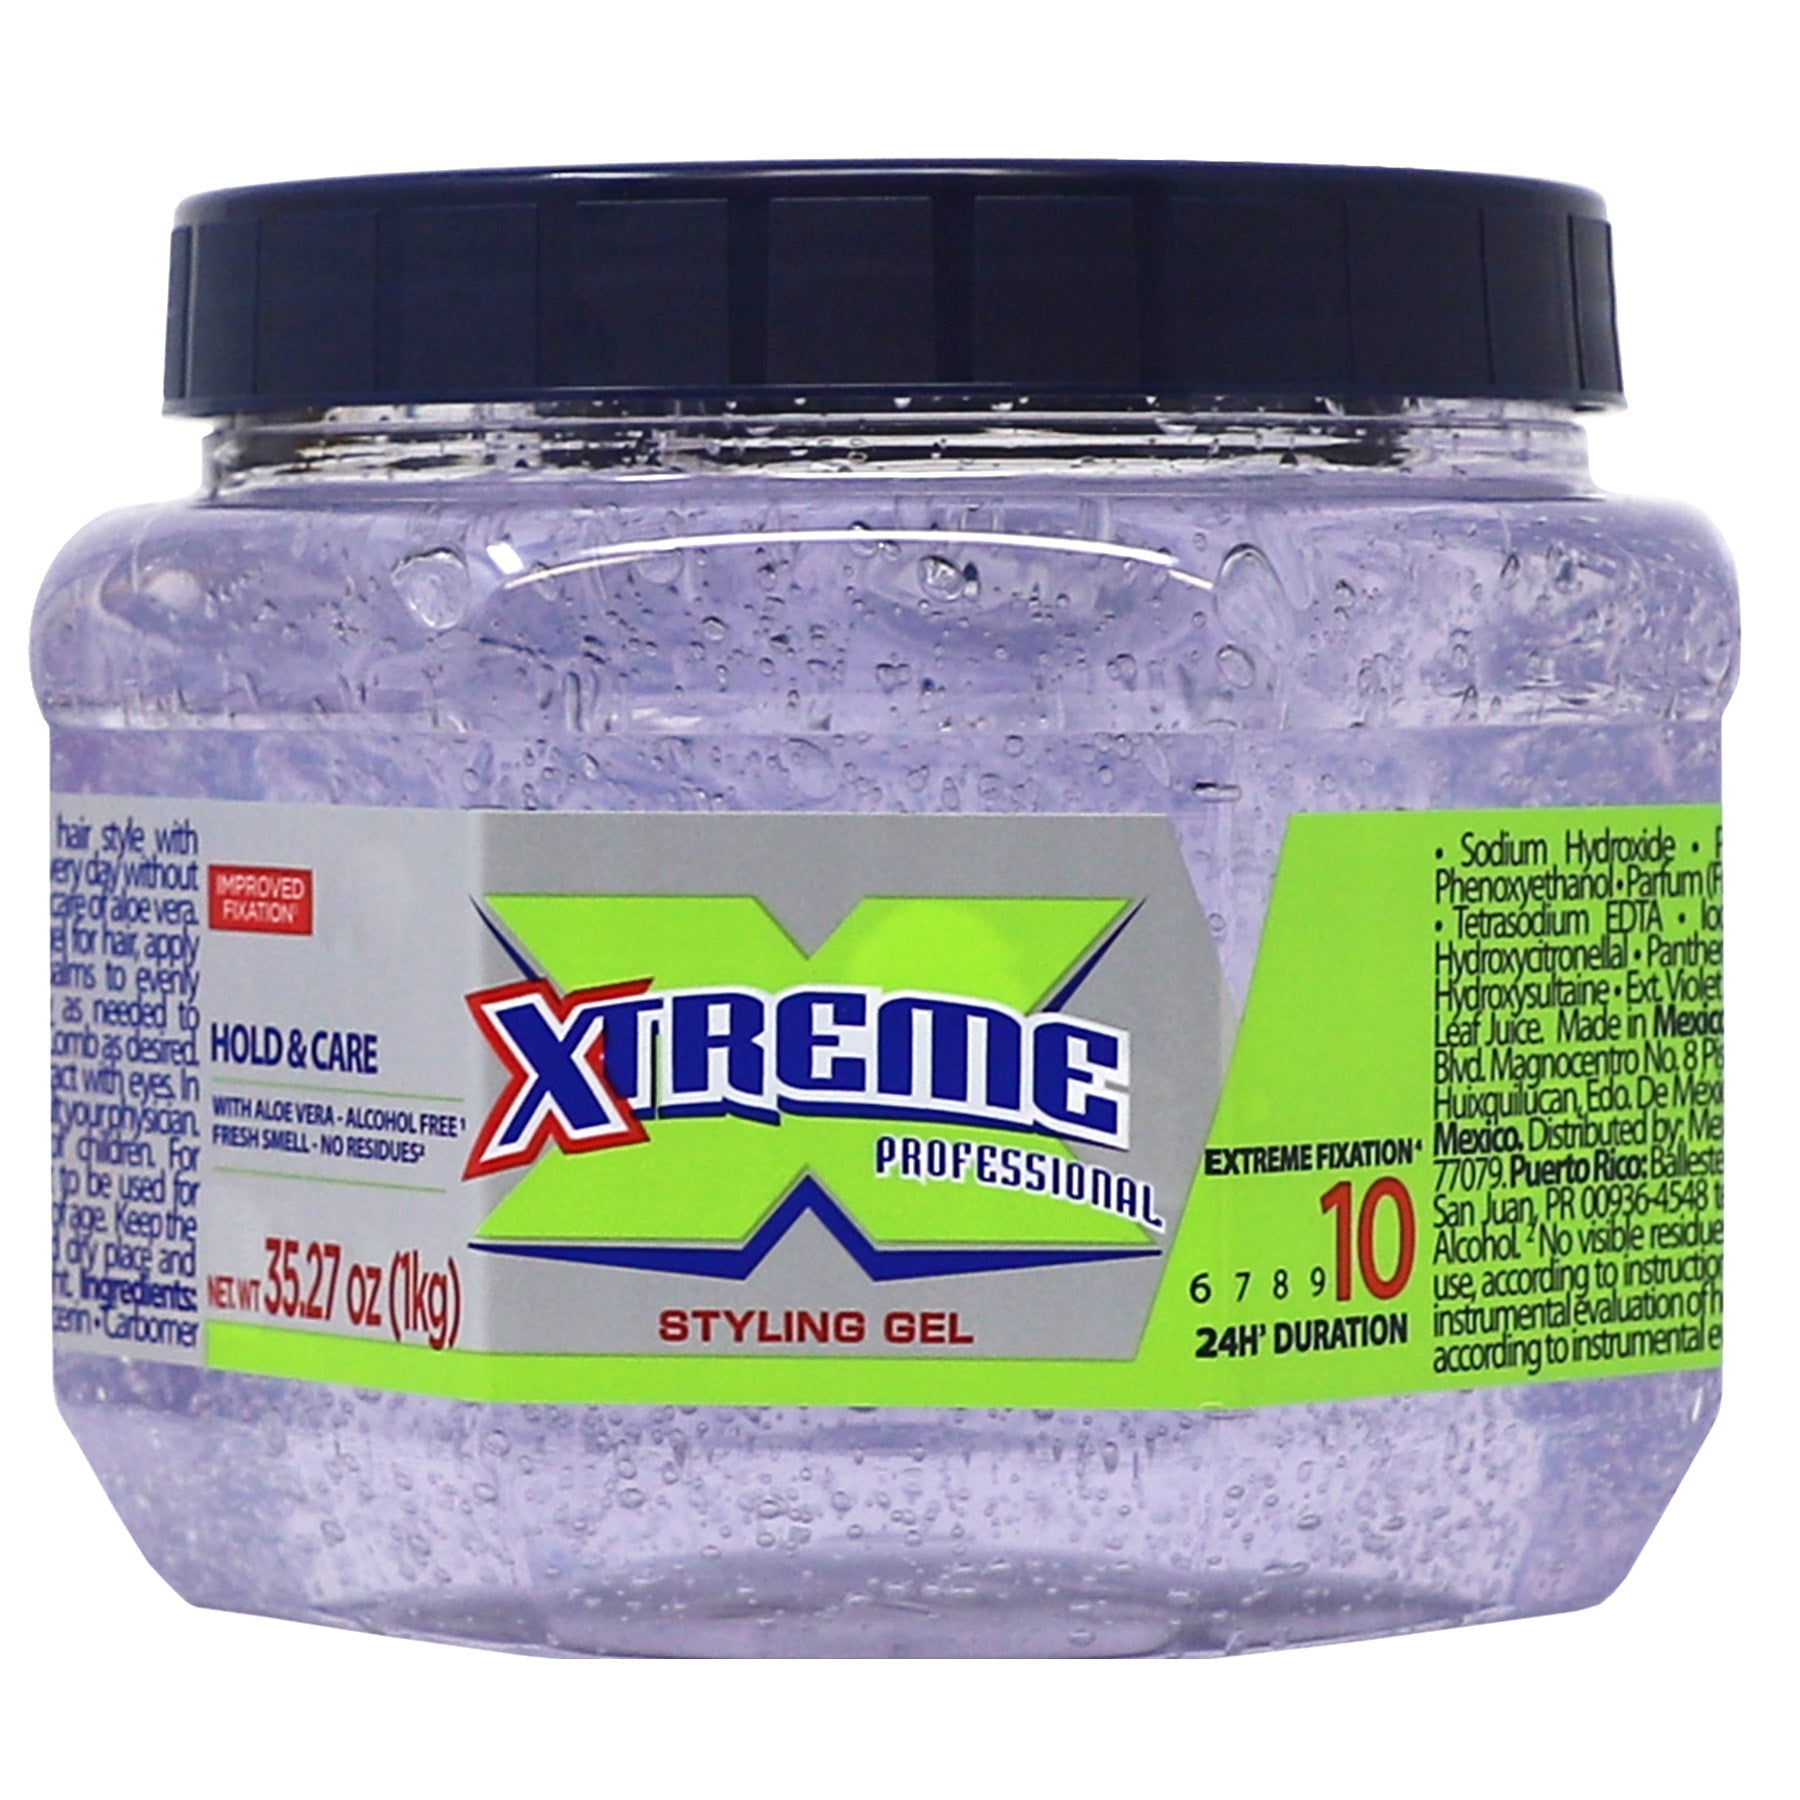 Xtreme Professional Styling Gel